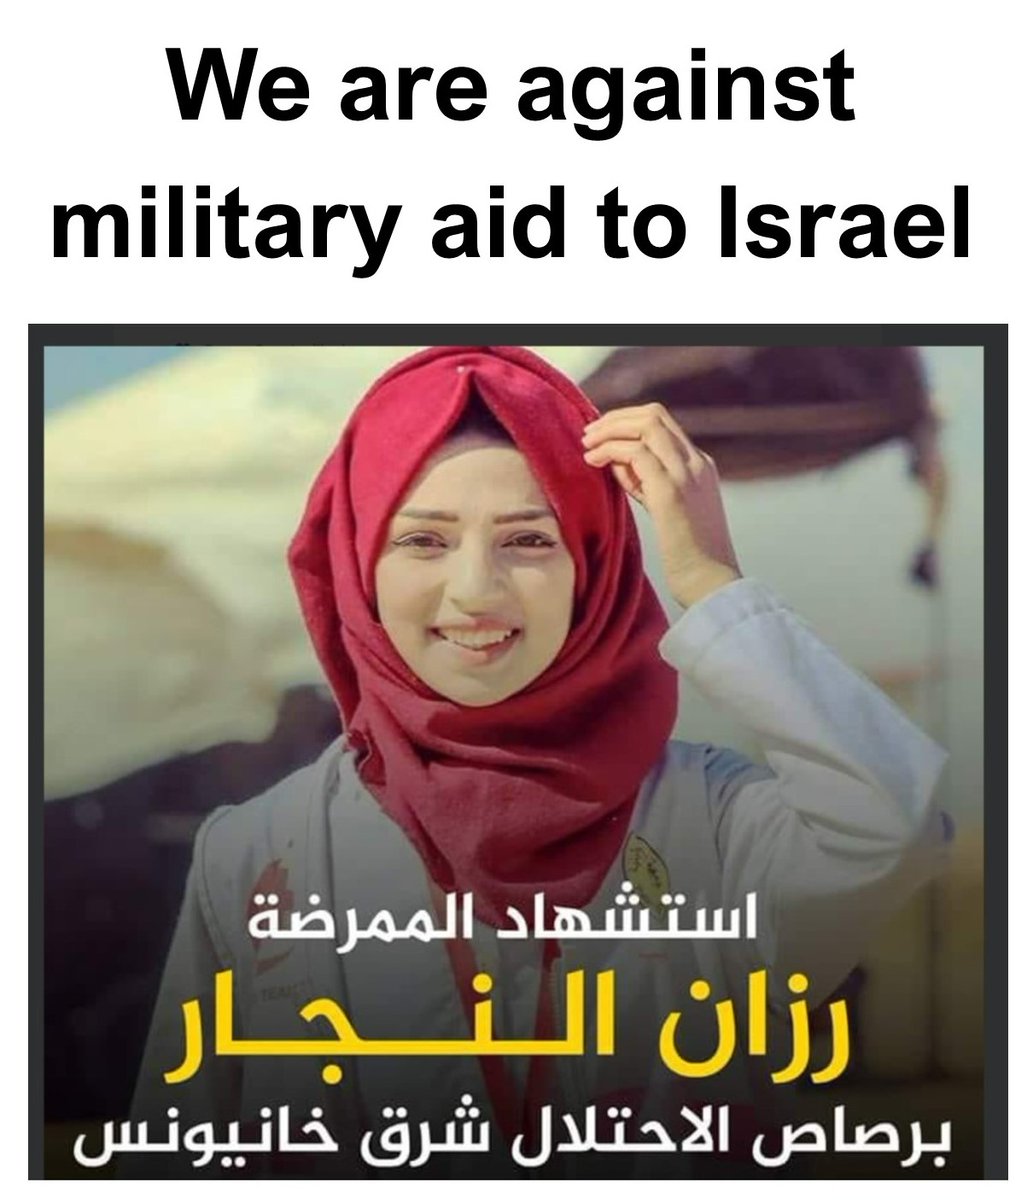 @zei_squirrel We use this poster in our City Council campaign against military aid to Israel: